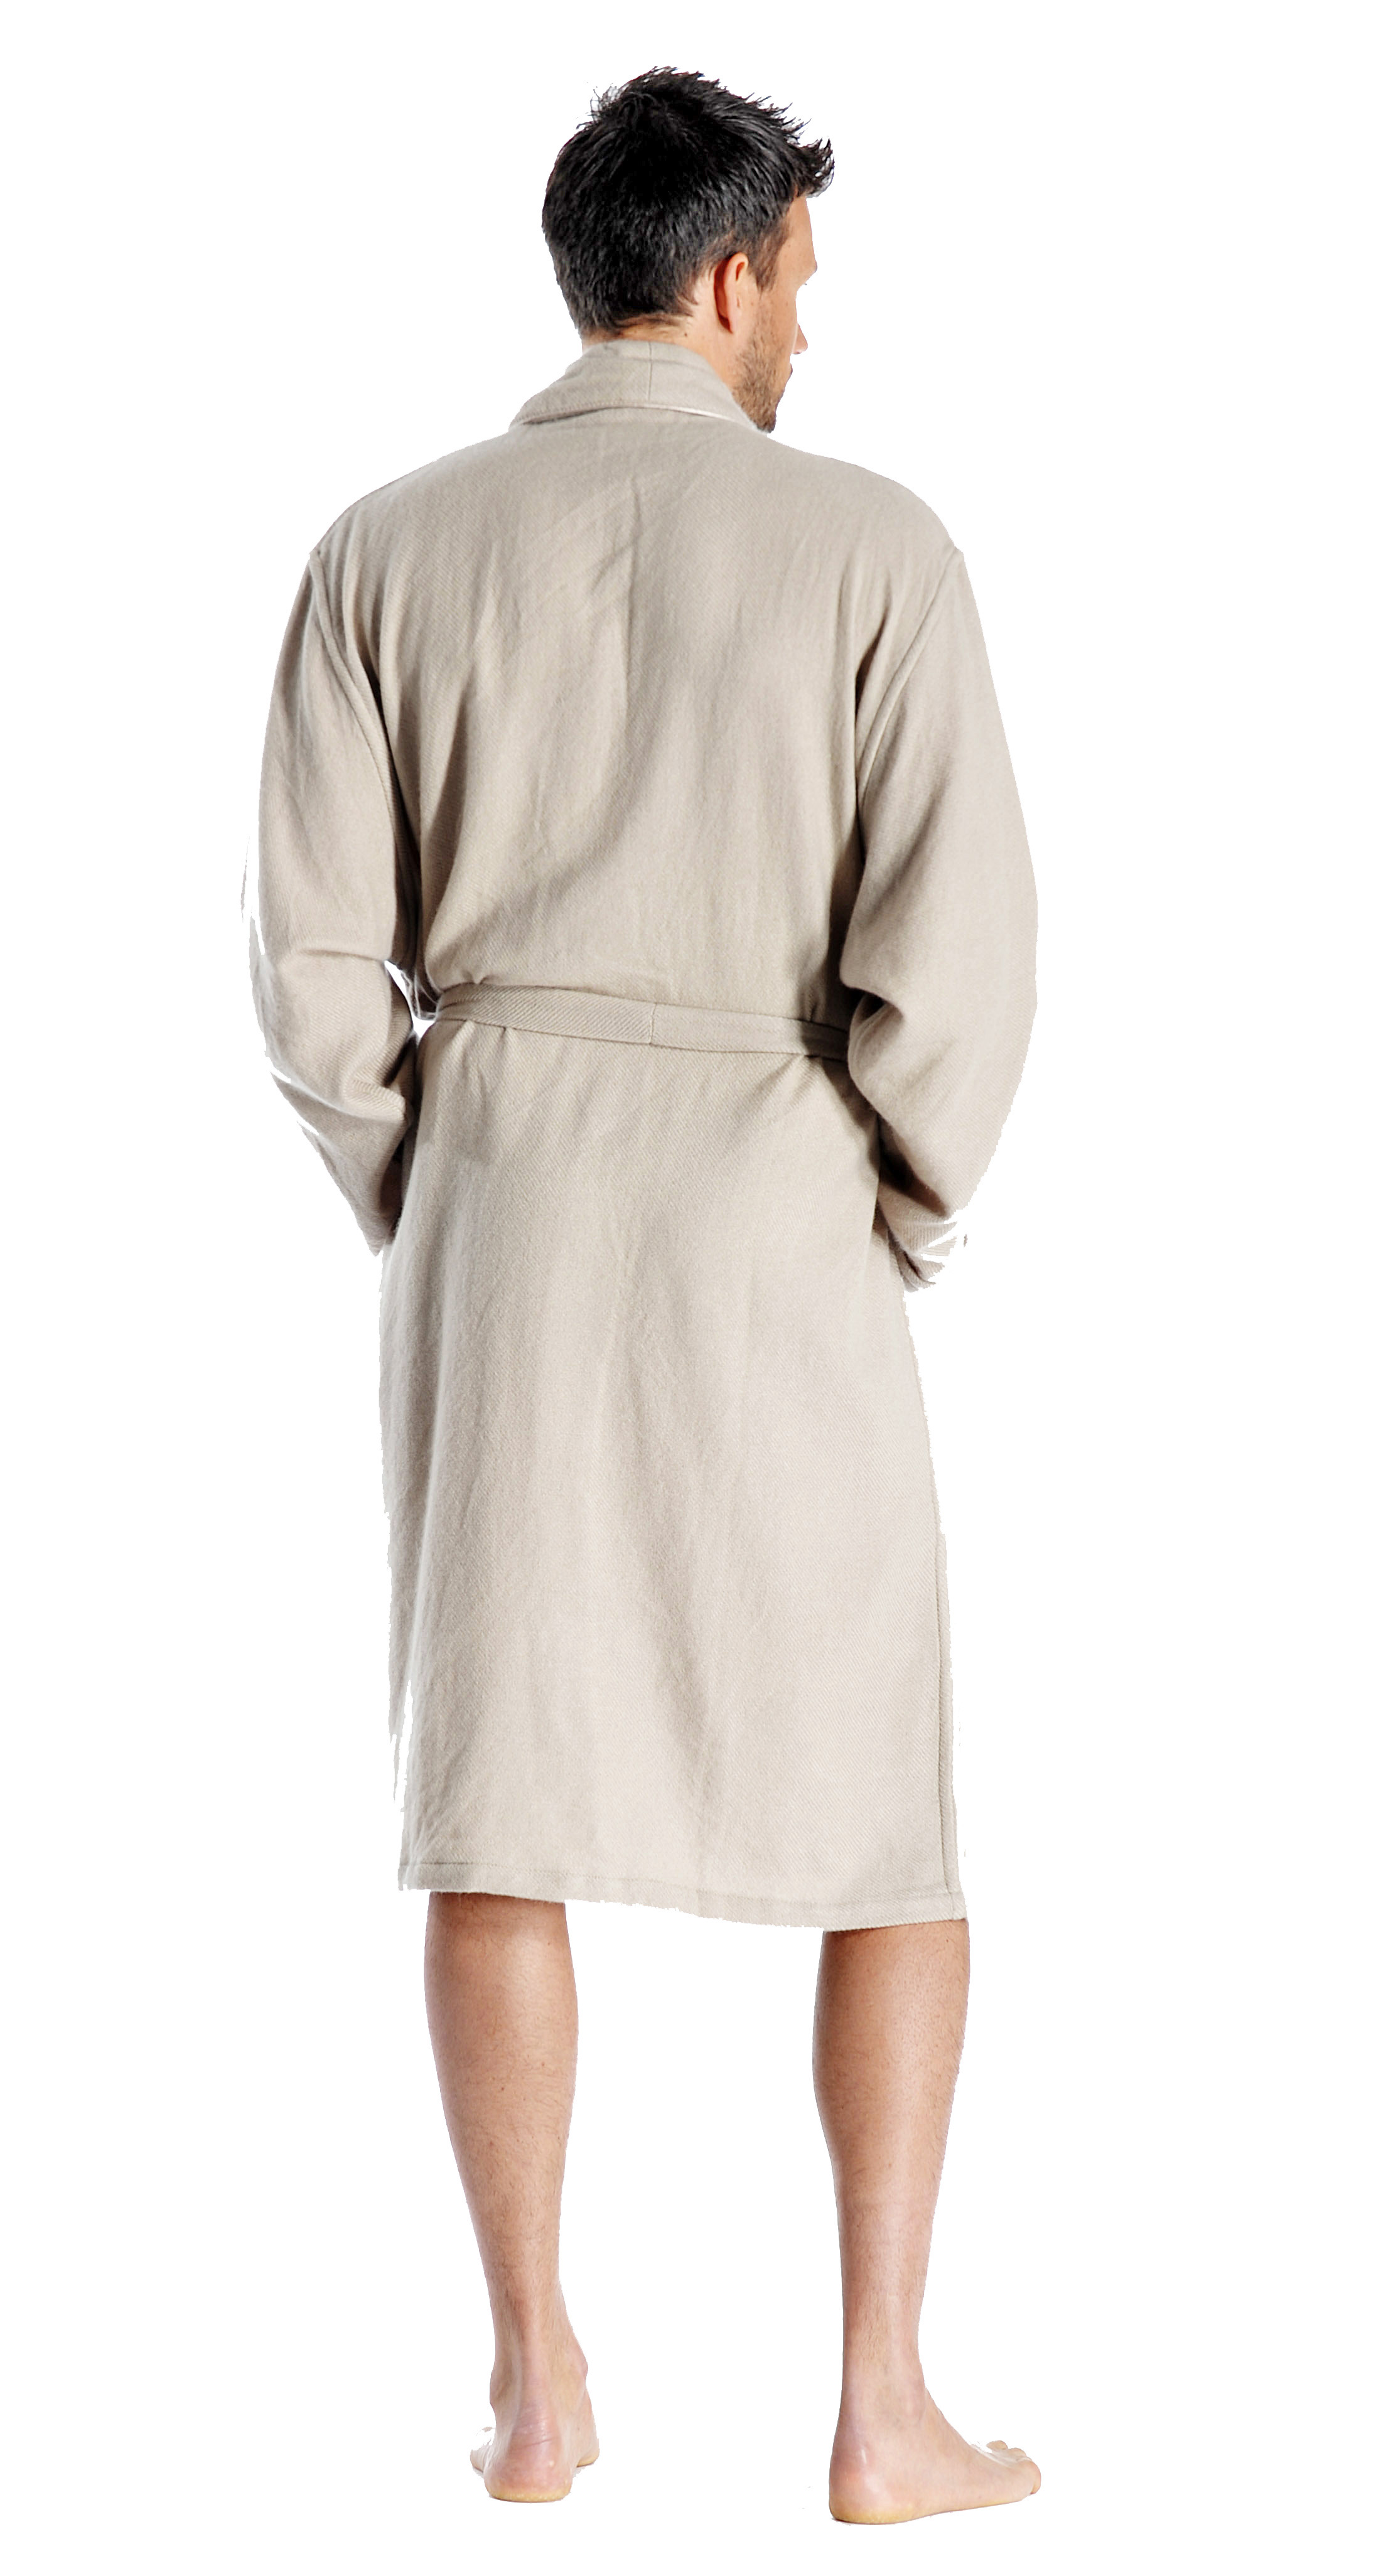 Pure Cashmere Knee Length Robe for Men (Earth Grey, Large/Extra Large)